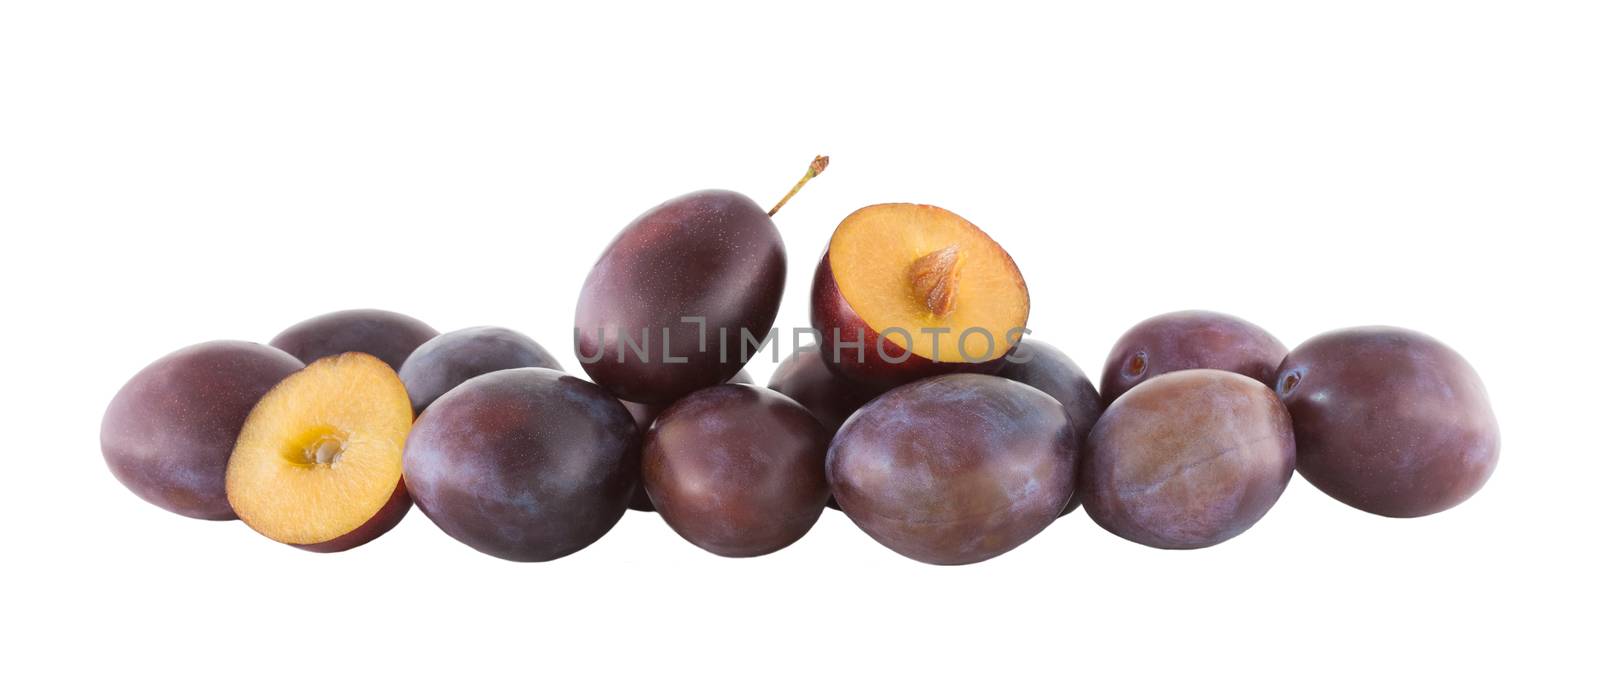 Plums on white background by Gbuglok